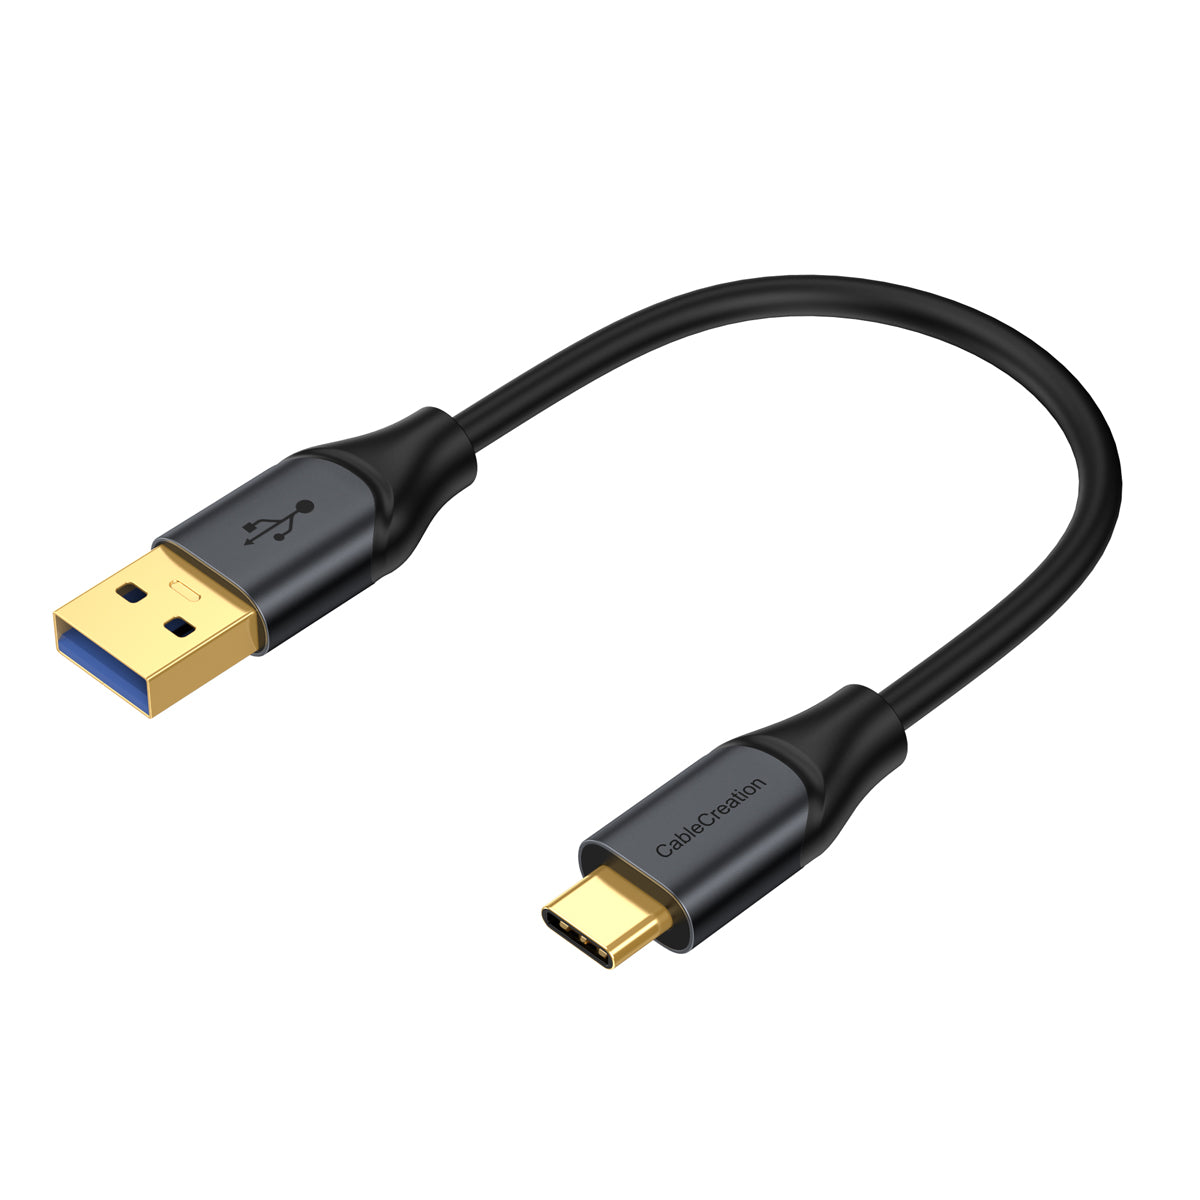 Short USB to USB C Cable 1.6FT